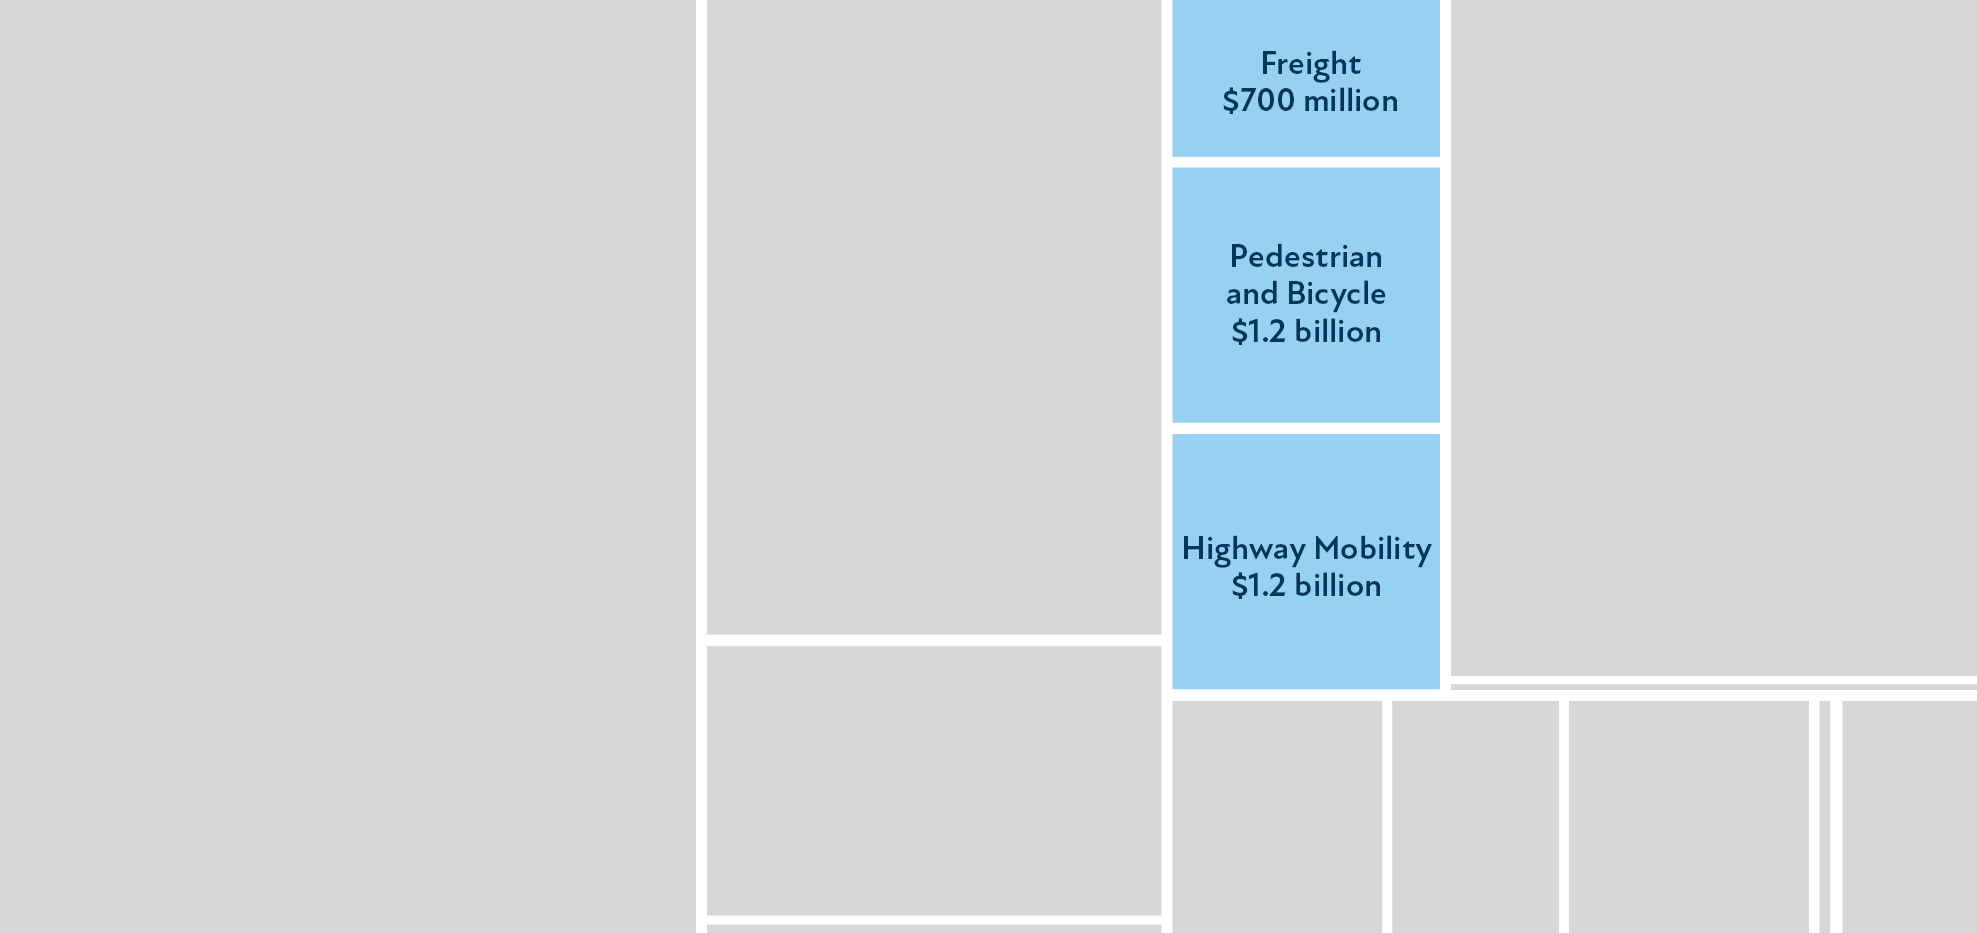 Critical Connection color chart showing how accessible Pedestrian and Bicycle Infrastructure ($1.2 B), freight ($700m), and Highway Mobility ($1.2B) make up a small portion of the total investment.